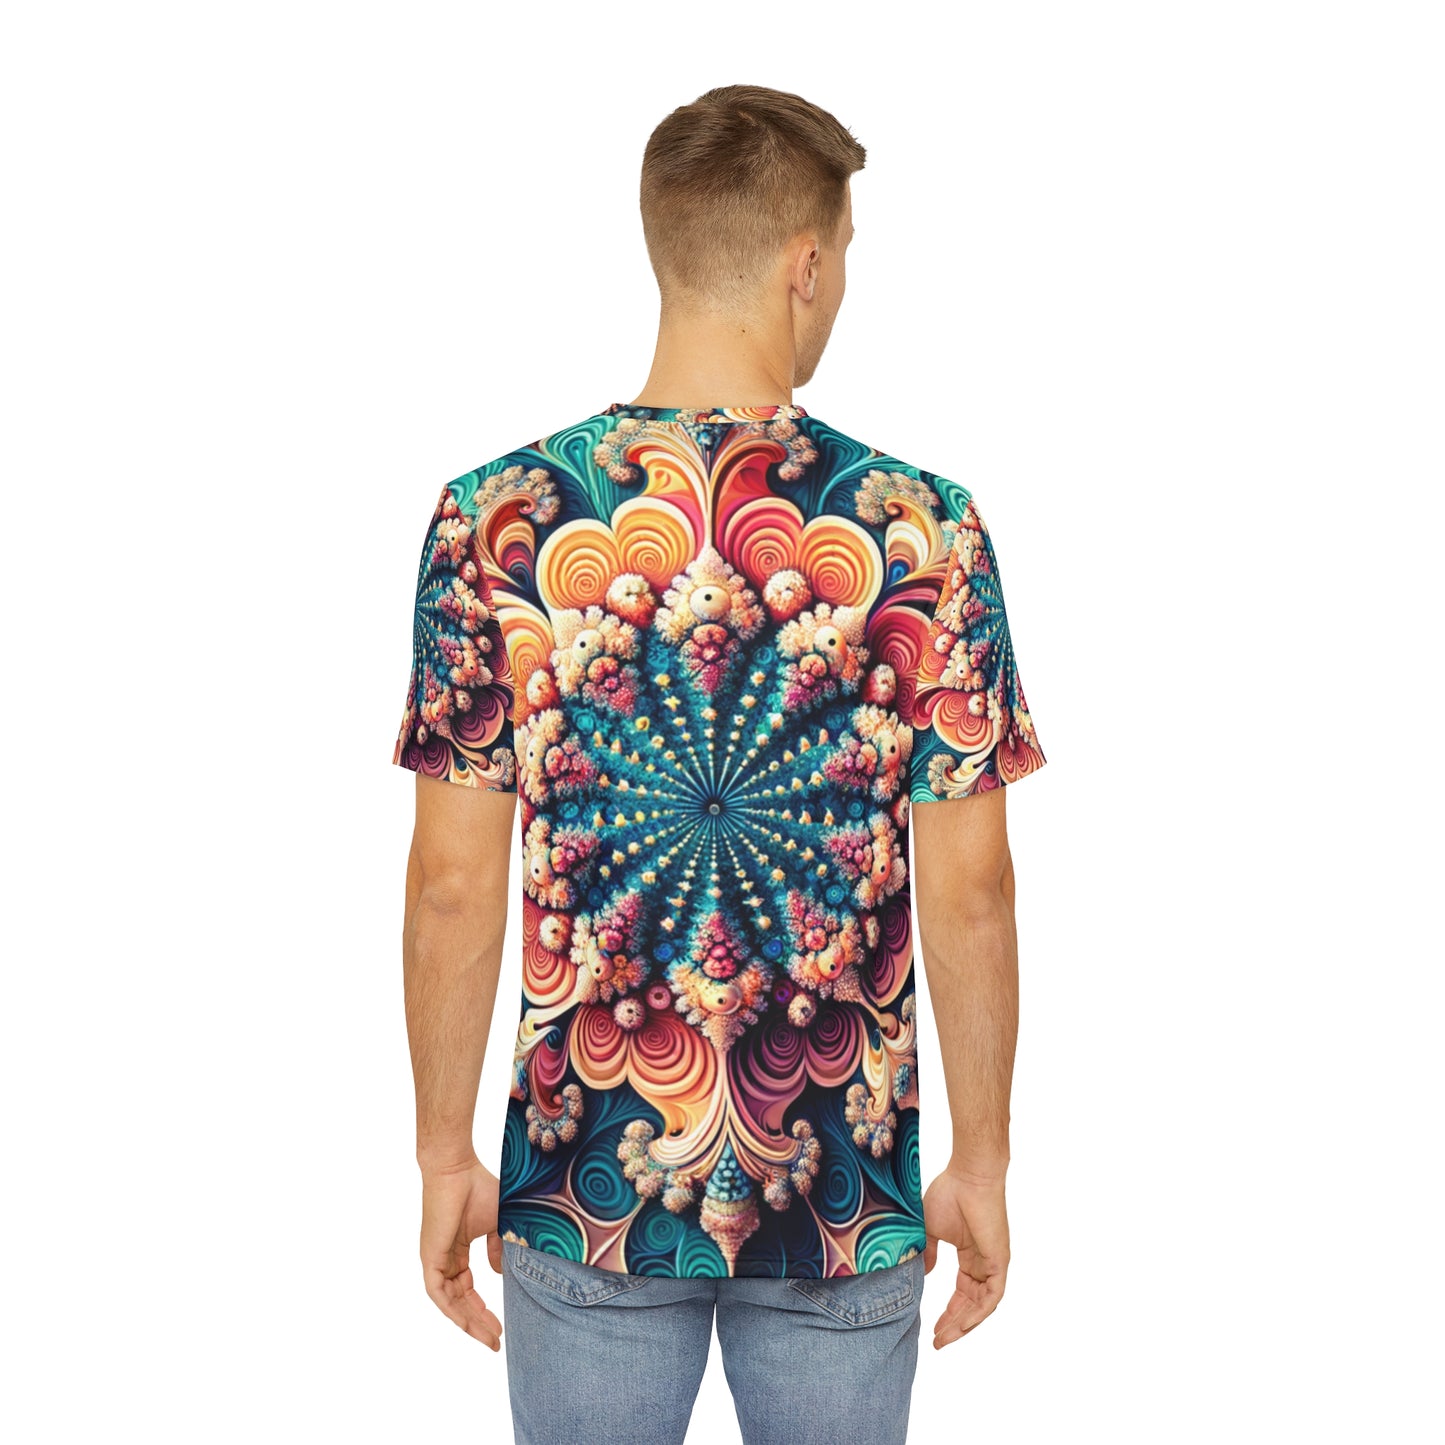 Back view of the Coral Mandala Whirl Pattern Crewneck Pullover All-Over Print Short-Sleeved Shirt black red  orange yellow blue mandala swirl pattern paired with casual denim pants worn by a white man